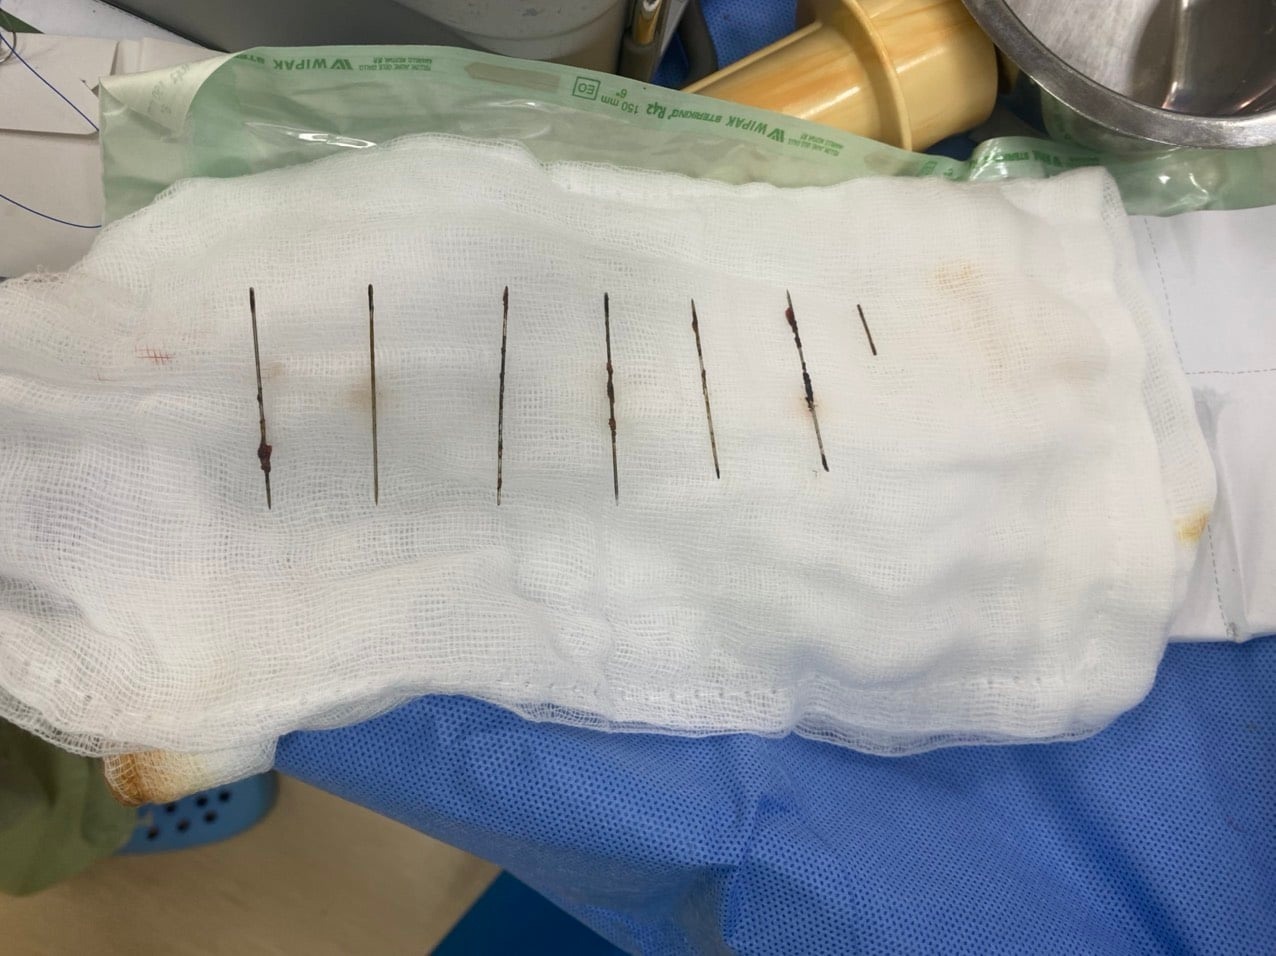 Take 7 needles in the chest of a 28-year-old woman